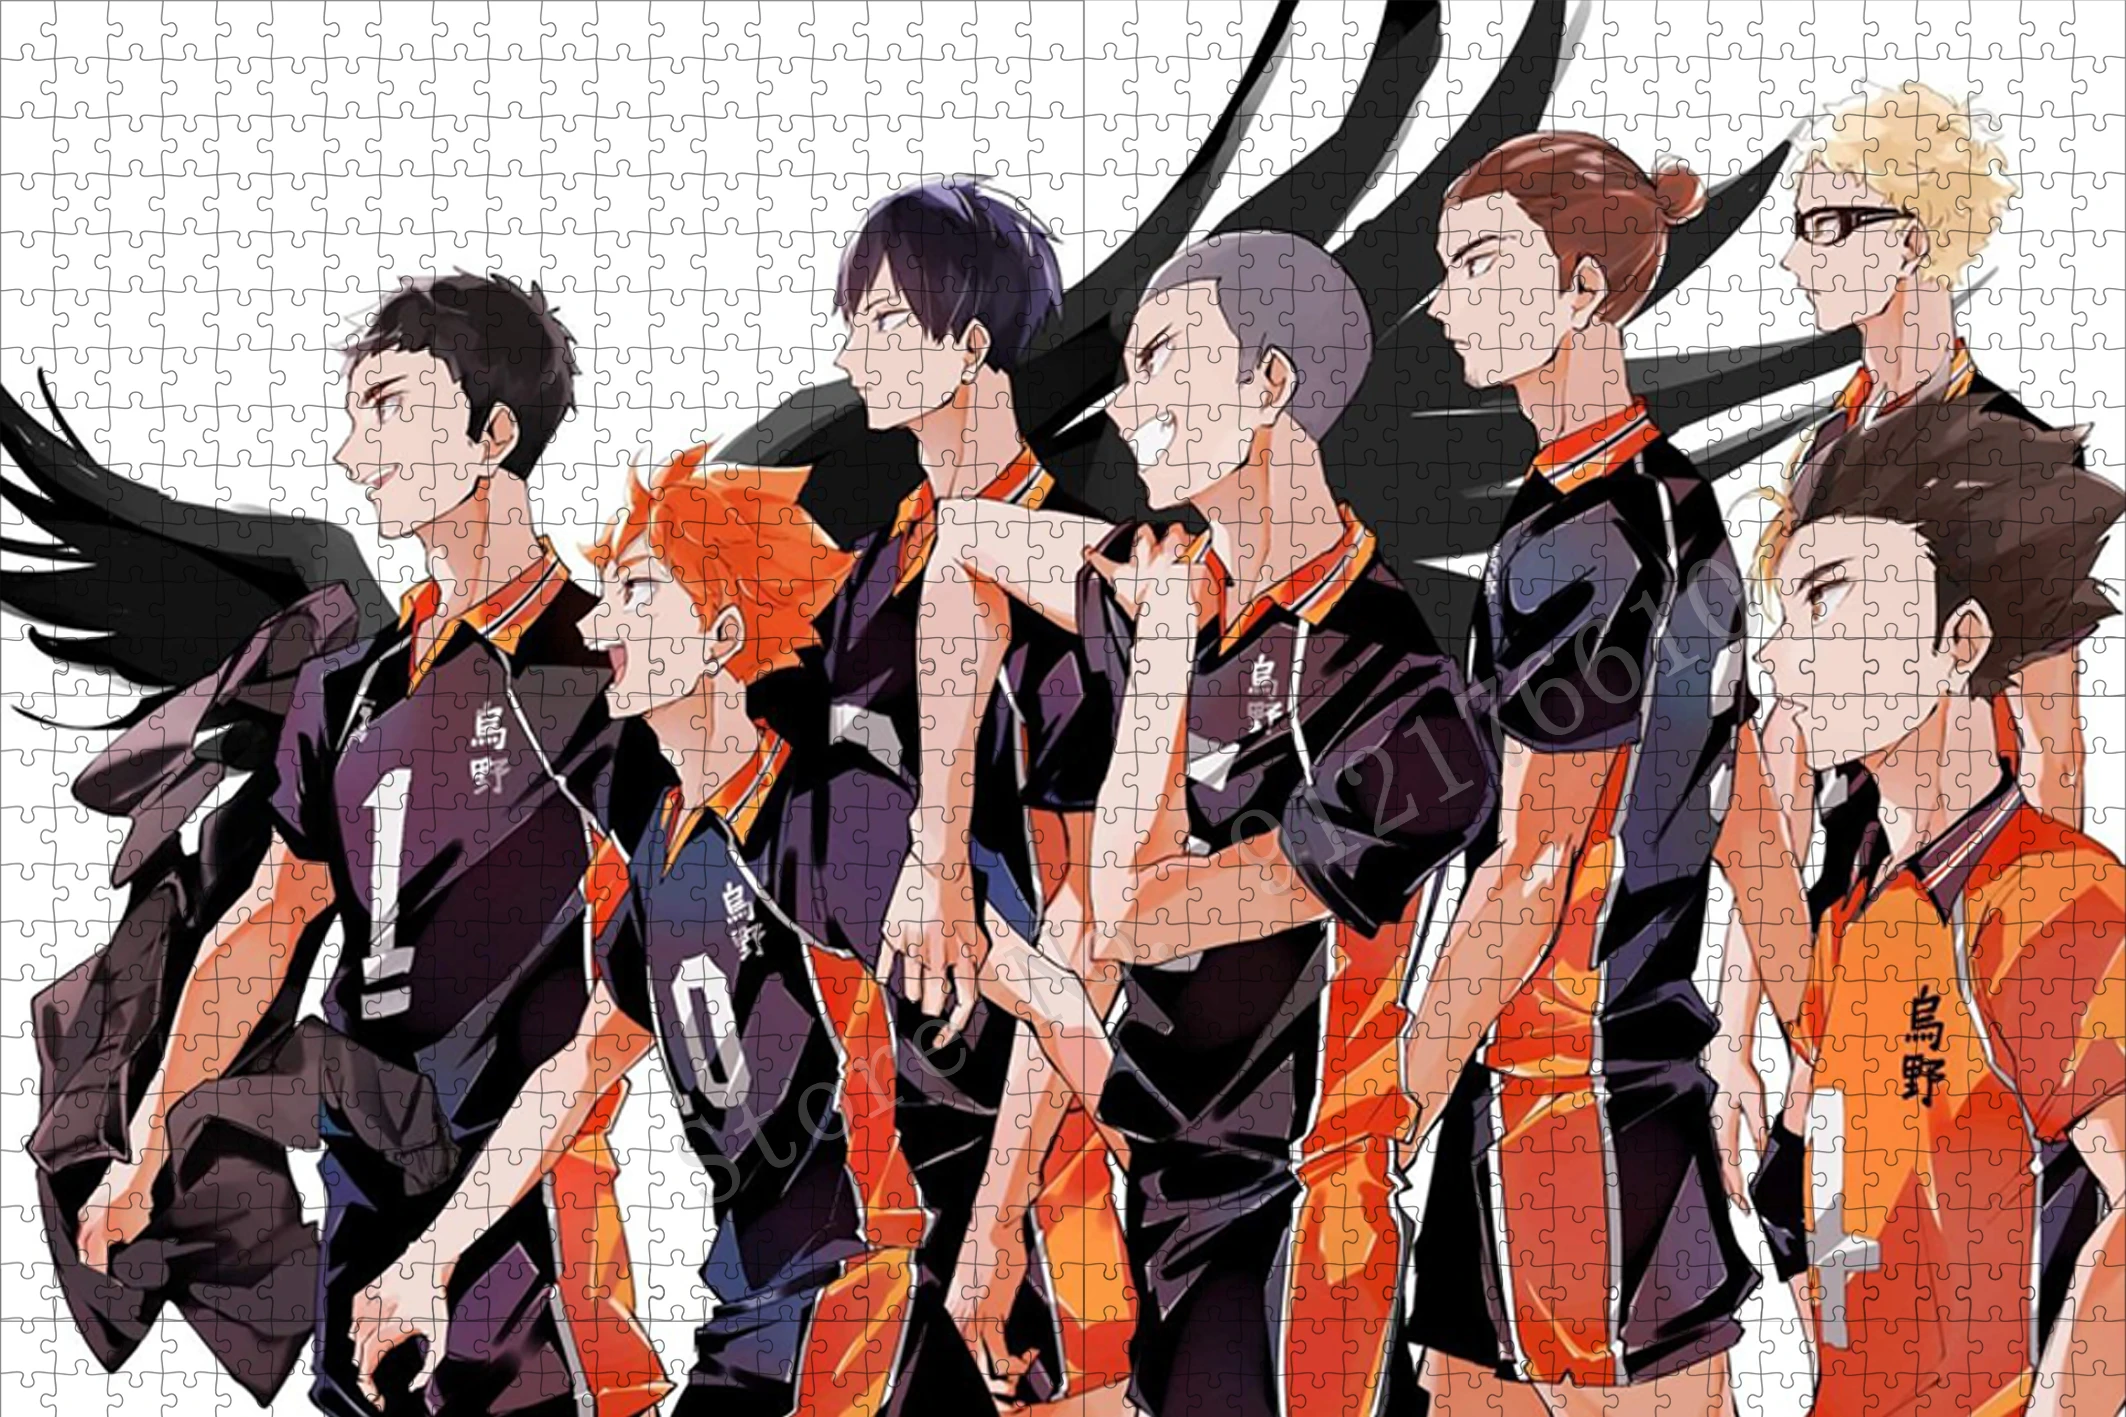 Purple Aesthetic Volleyball Junior Jigsaw Puzzle Haikyuu 300/500/1000 Pics  Anime Puzzles Decompression Game Educational Gifts - AliExpress